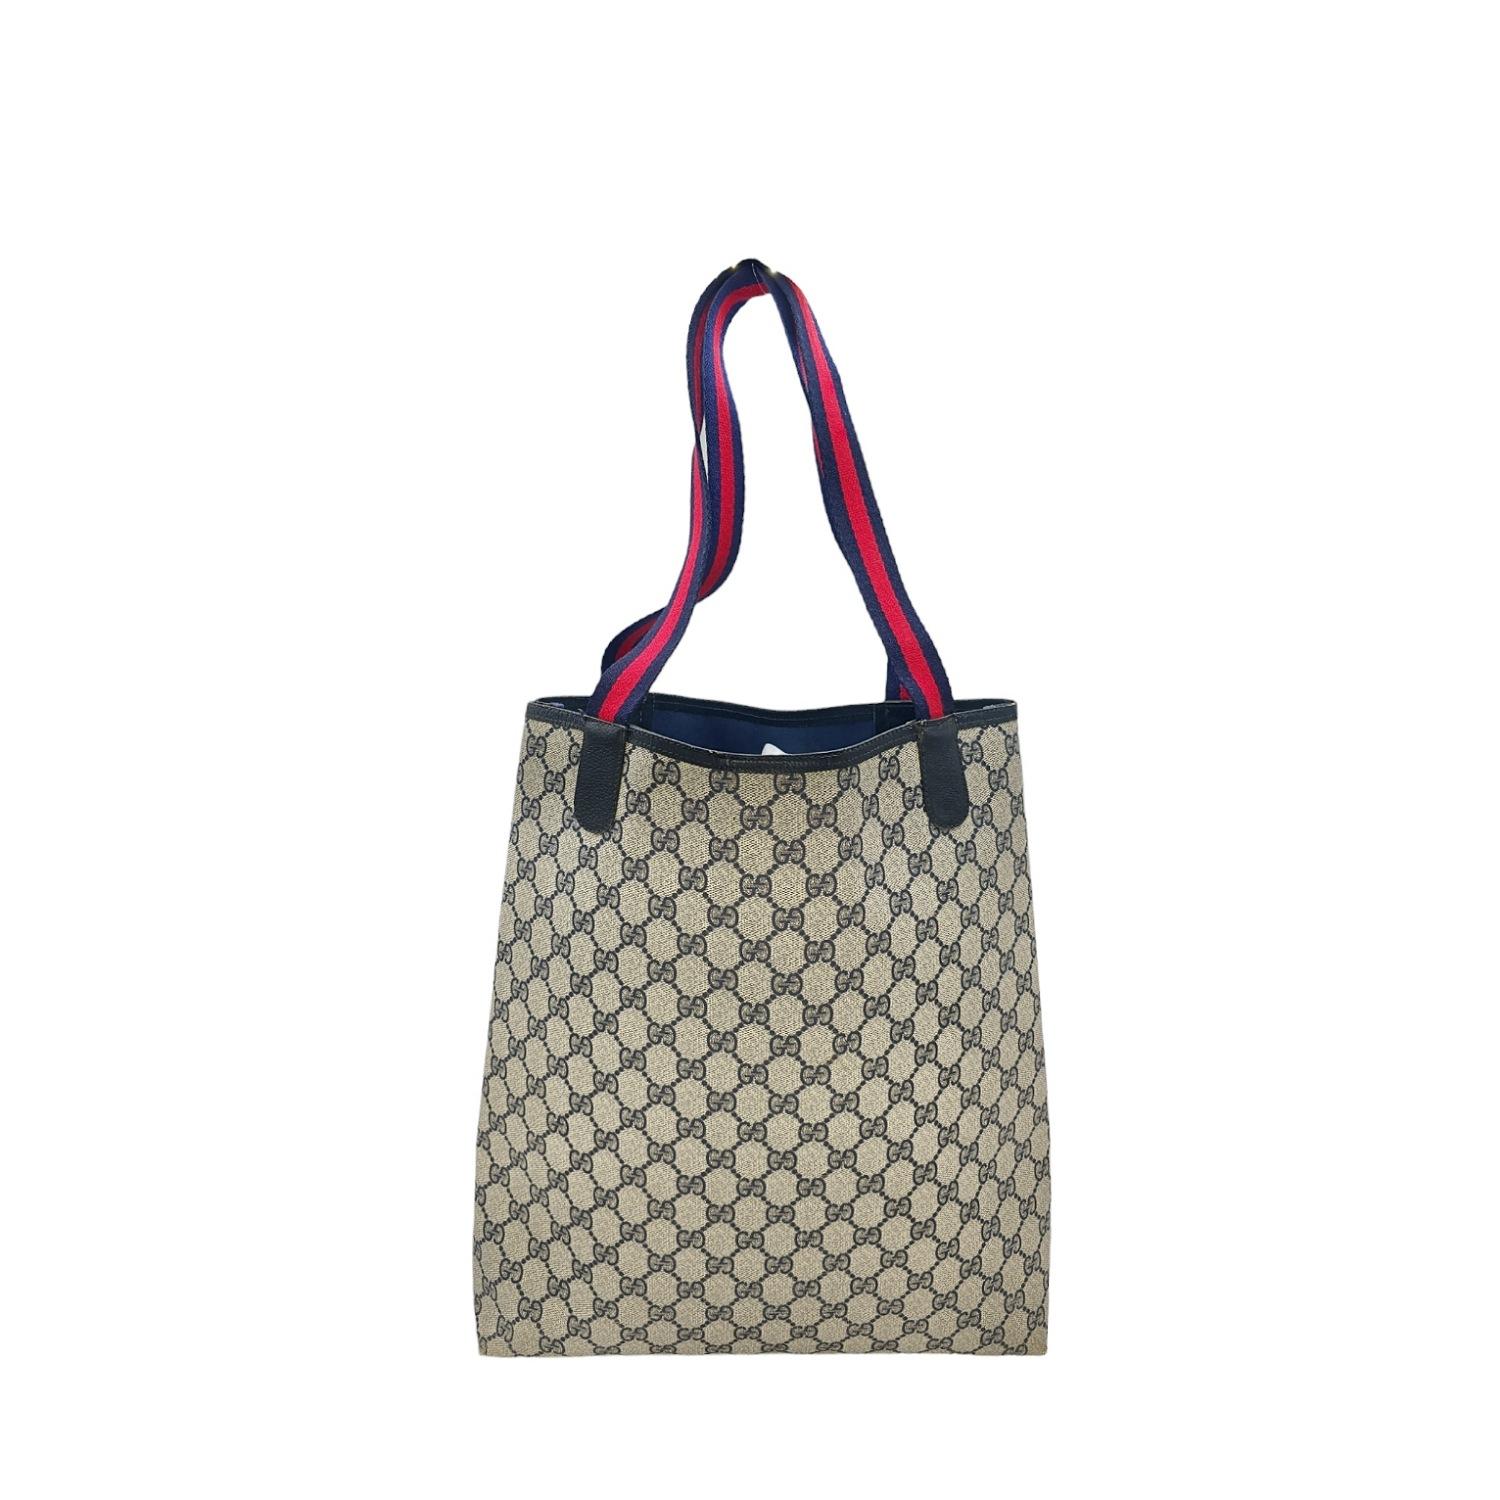 As stylish as it is spacious, this Gucci Vintage GG Monogram Sherry Tote is the perfect accessory for your everyday needs. Featuring the iconic GG Monogram coated canvas with leather trimming and gold-tone interlocking G logo, it offers a chic and